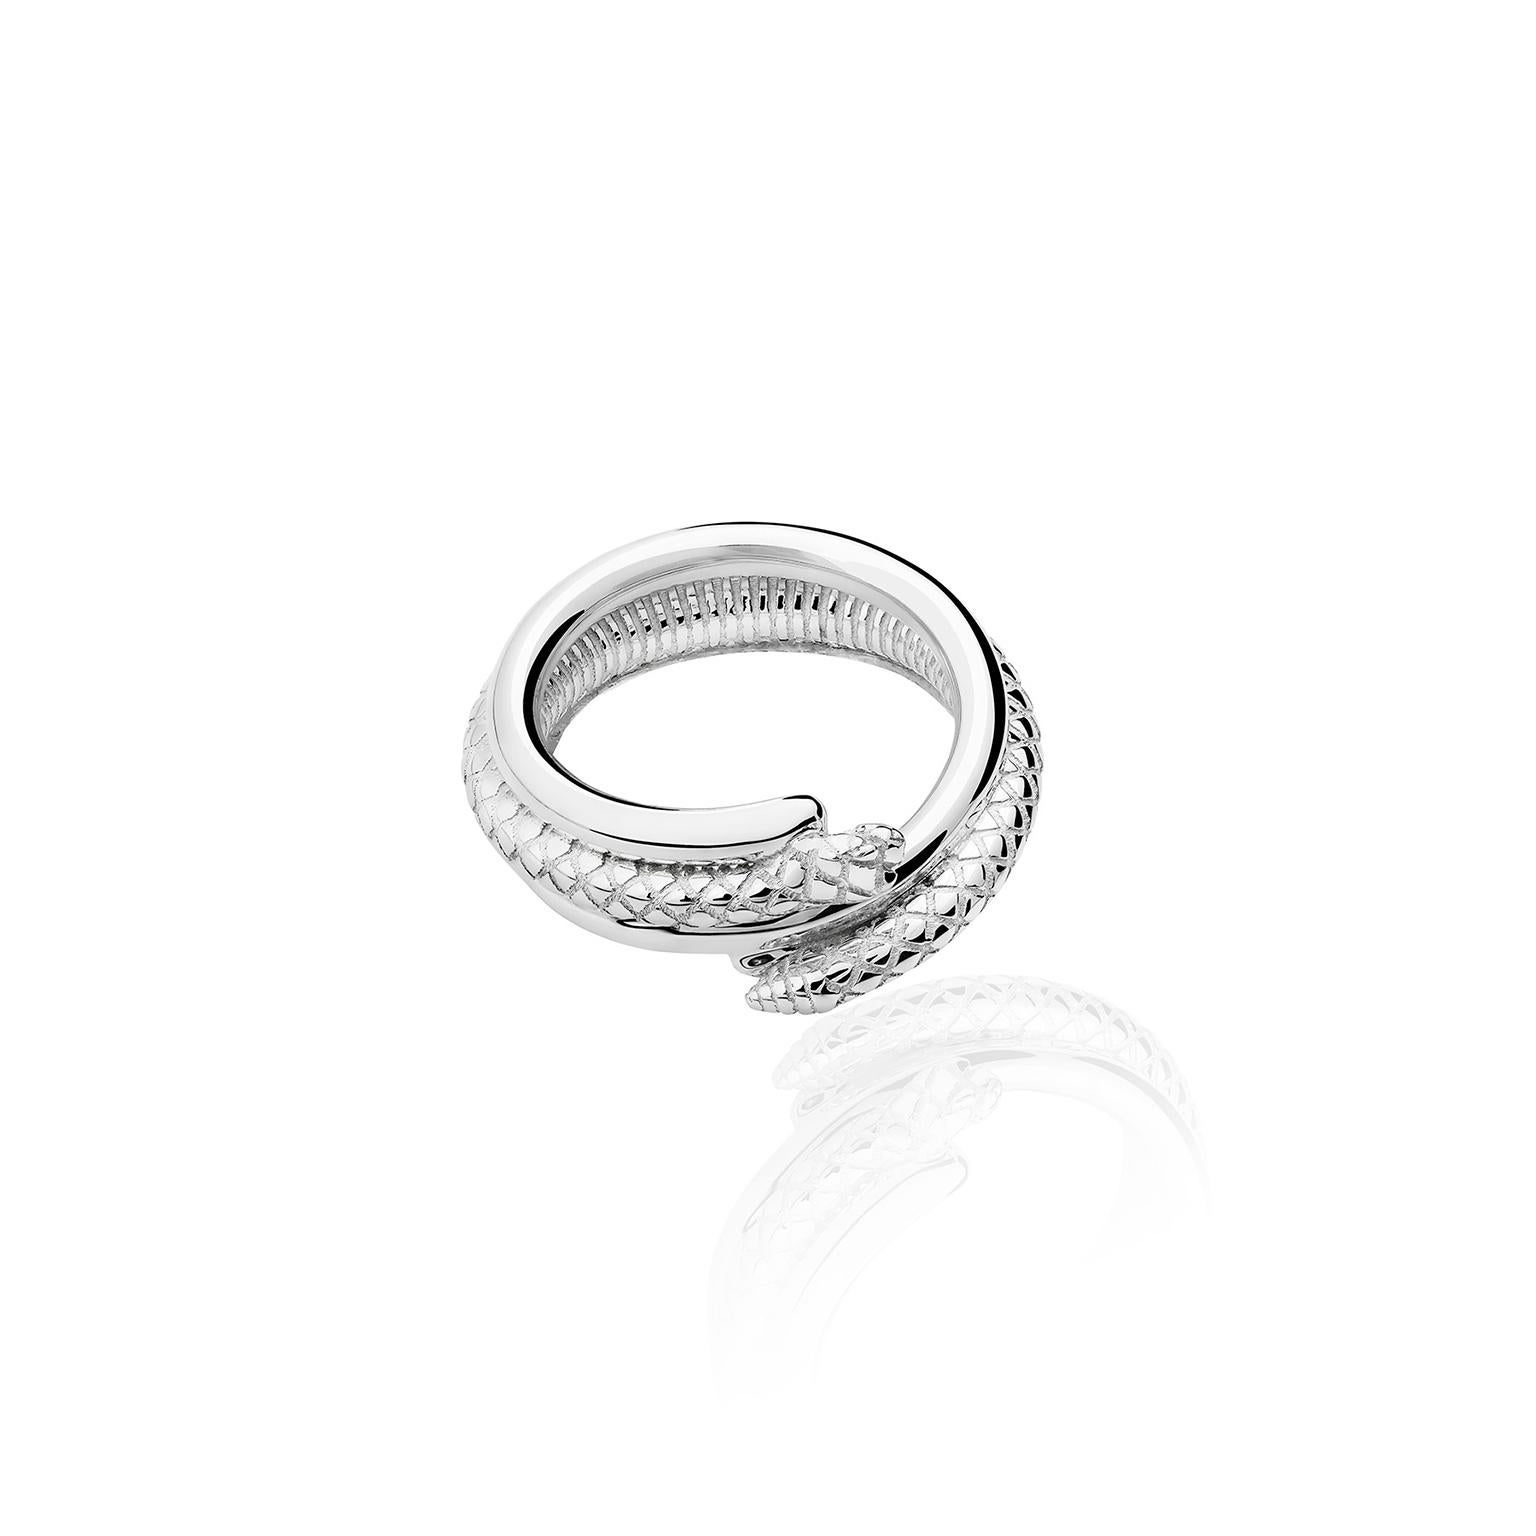 The Snake Ring of the Animales Collection by TANE is made of sterlingsilver, its ring shape intersperses a polished silver spiral with a perfectly sculpted snake, which wraps itself seductively around the body.  Handmade in Mexico.

TANE, the